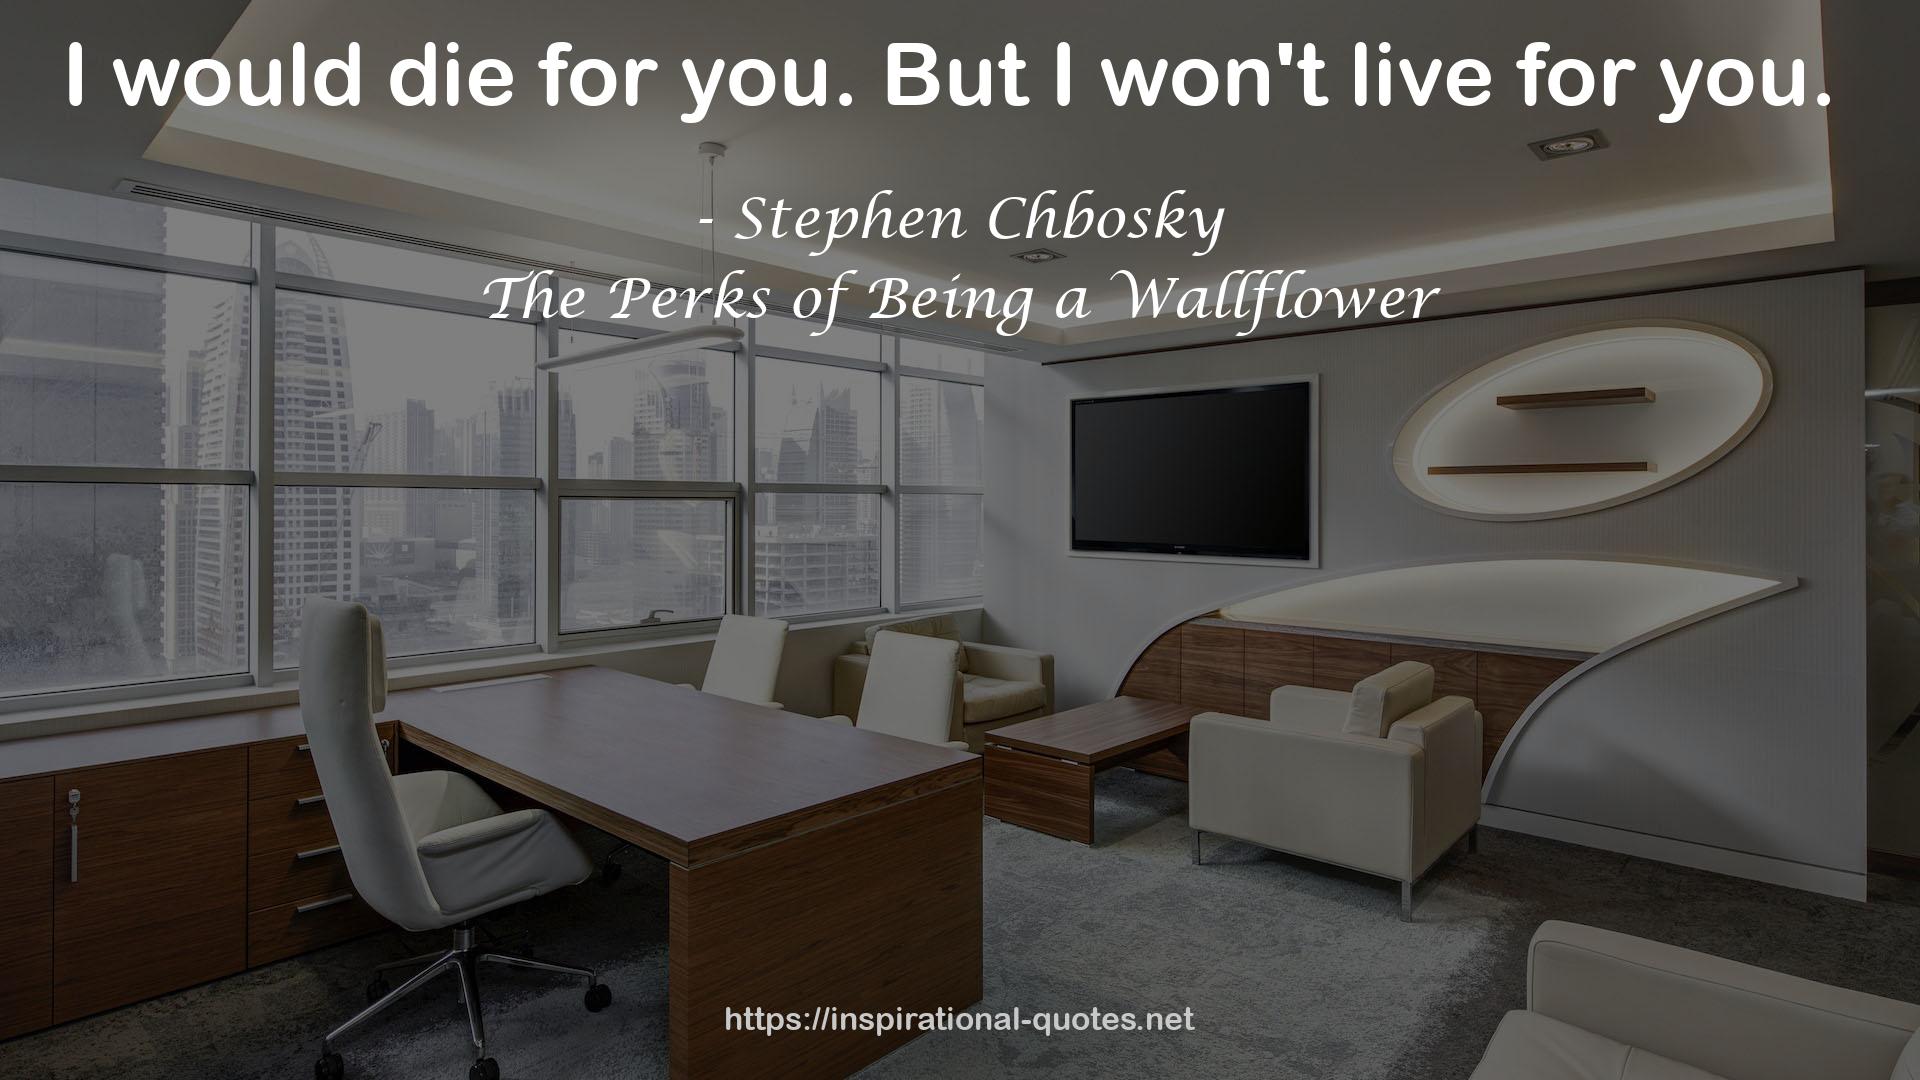 Stephen Chbosky QUOTES